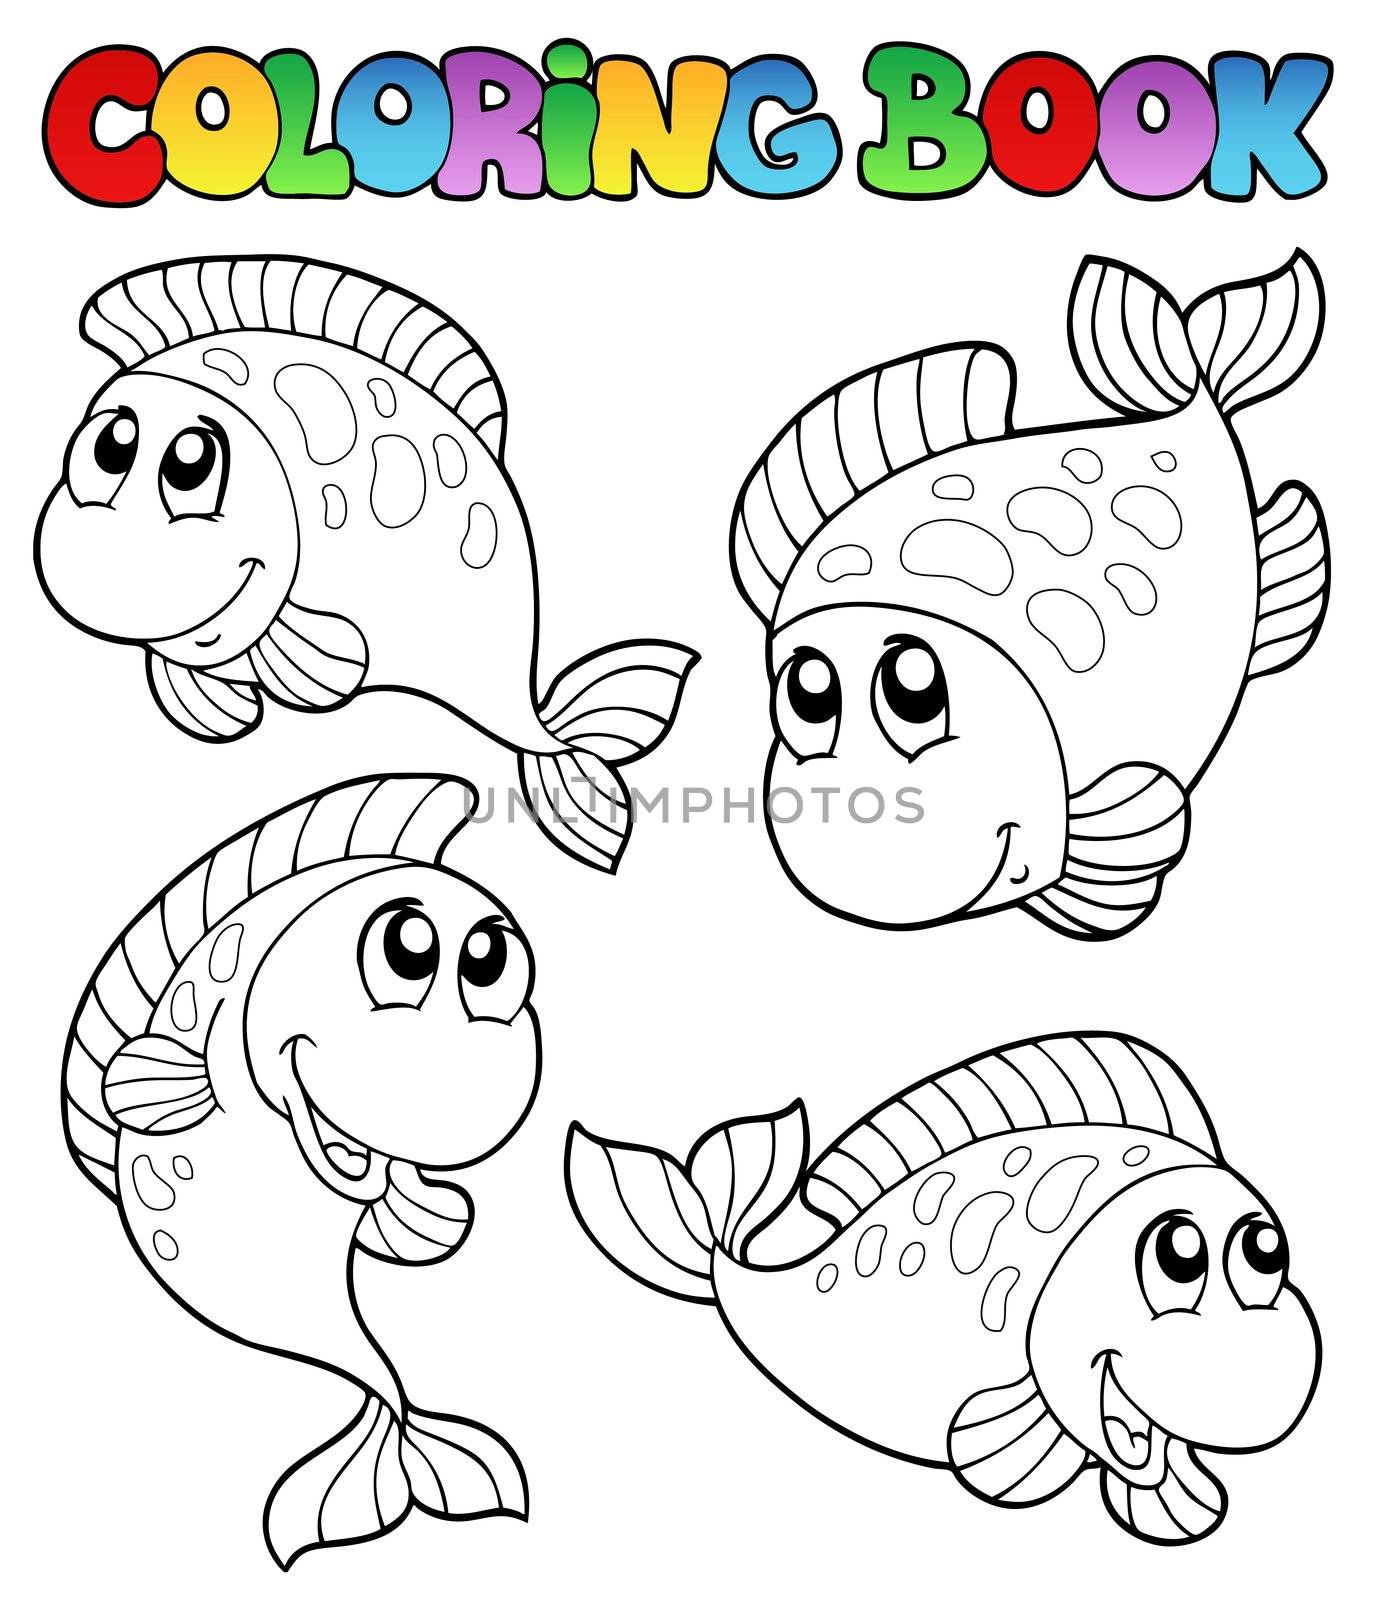 Coloring book with four fishes - vector illustration.